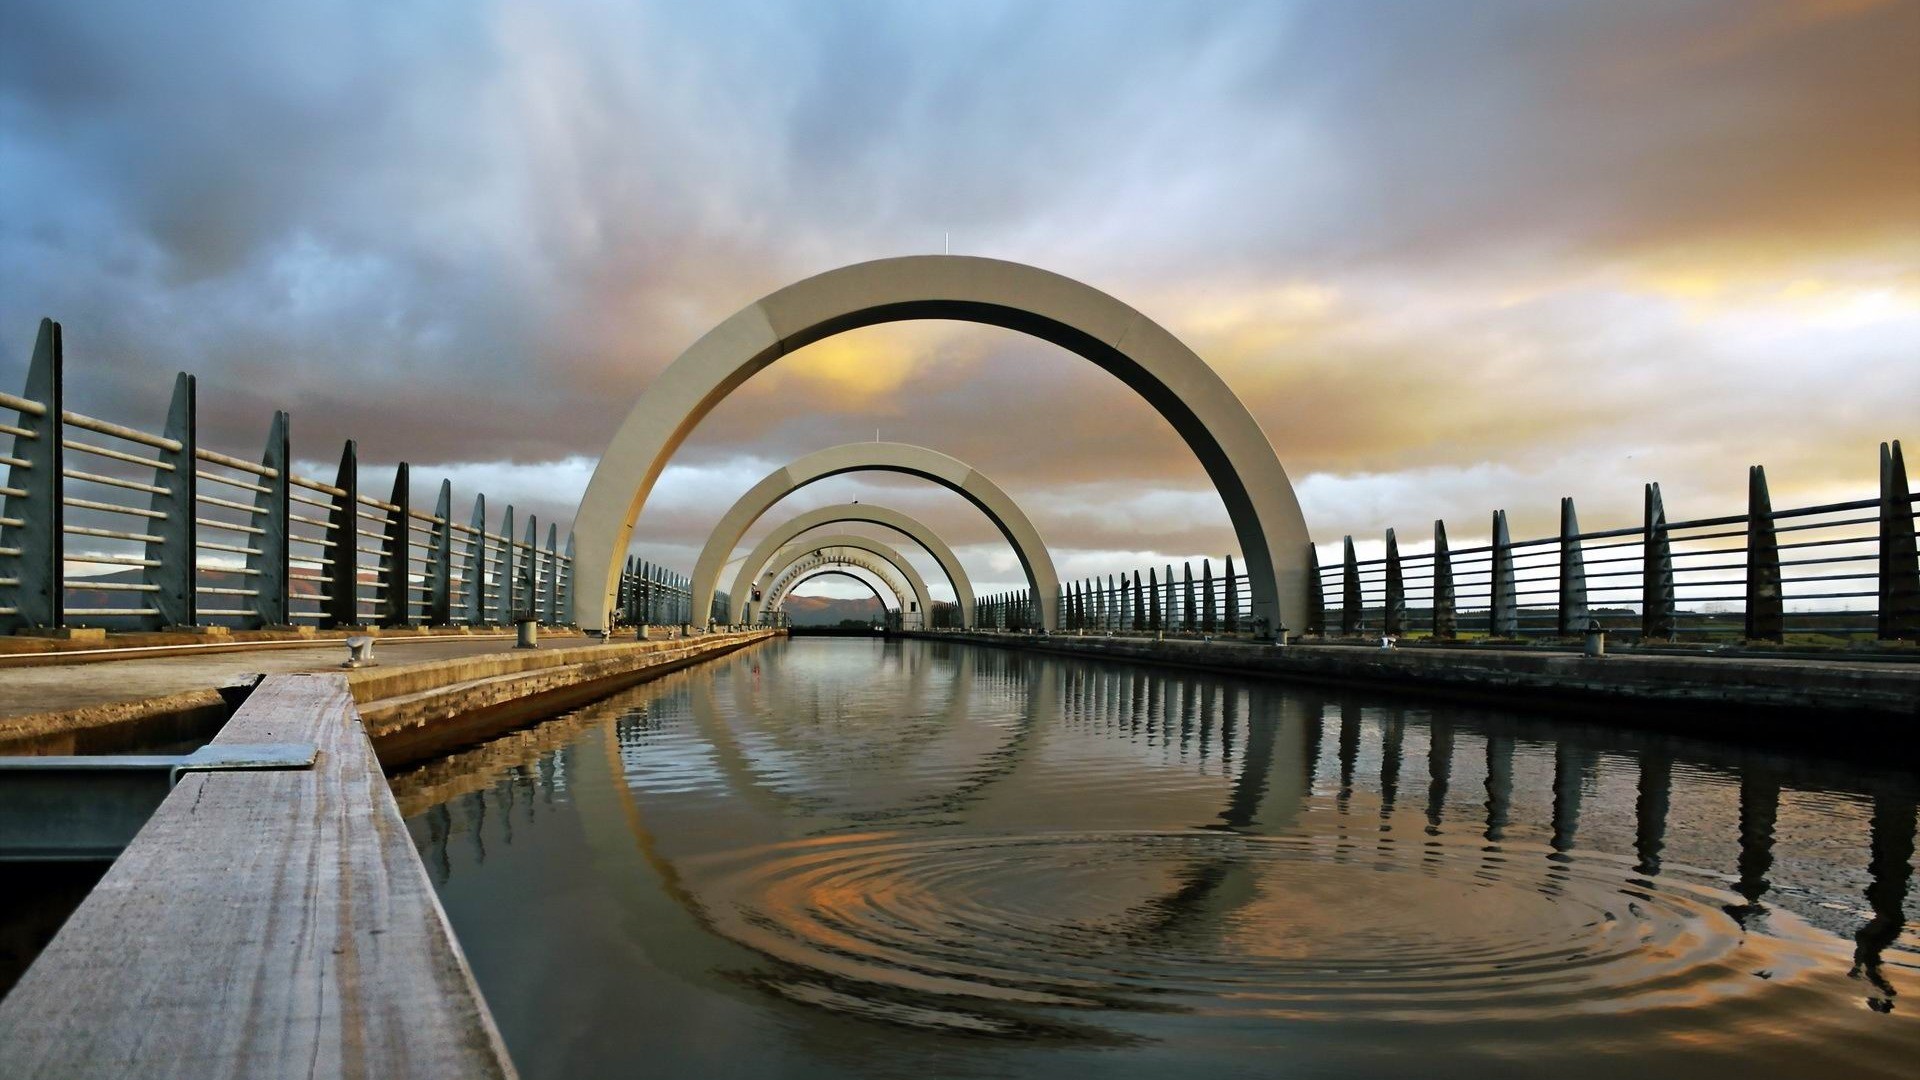 General 1920x1080 architecture water canal wheels Falkirk Wheel Scotland UK reflection fence clouds arch ripples